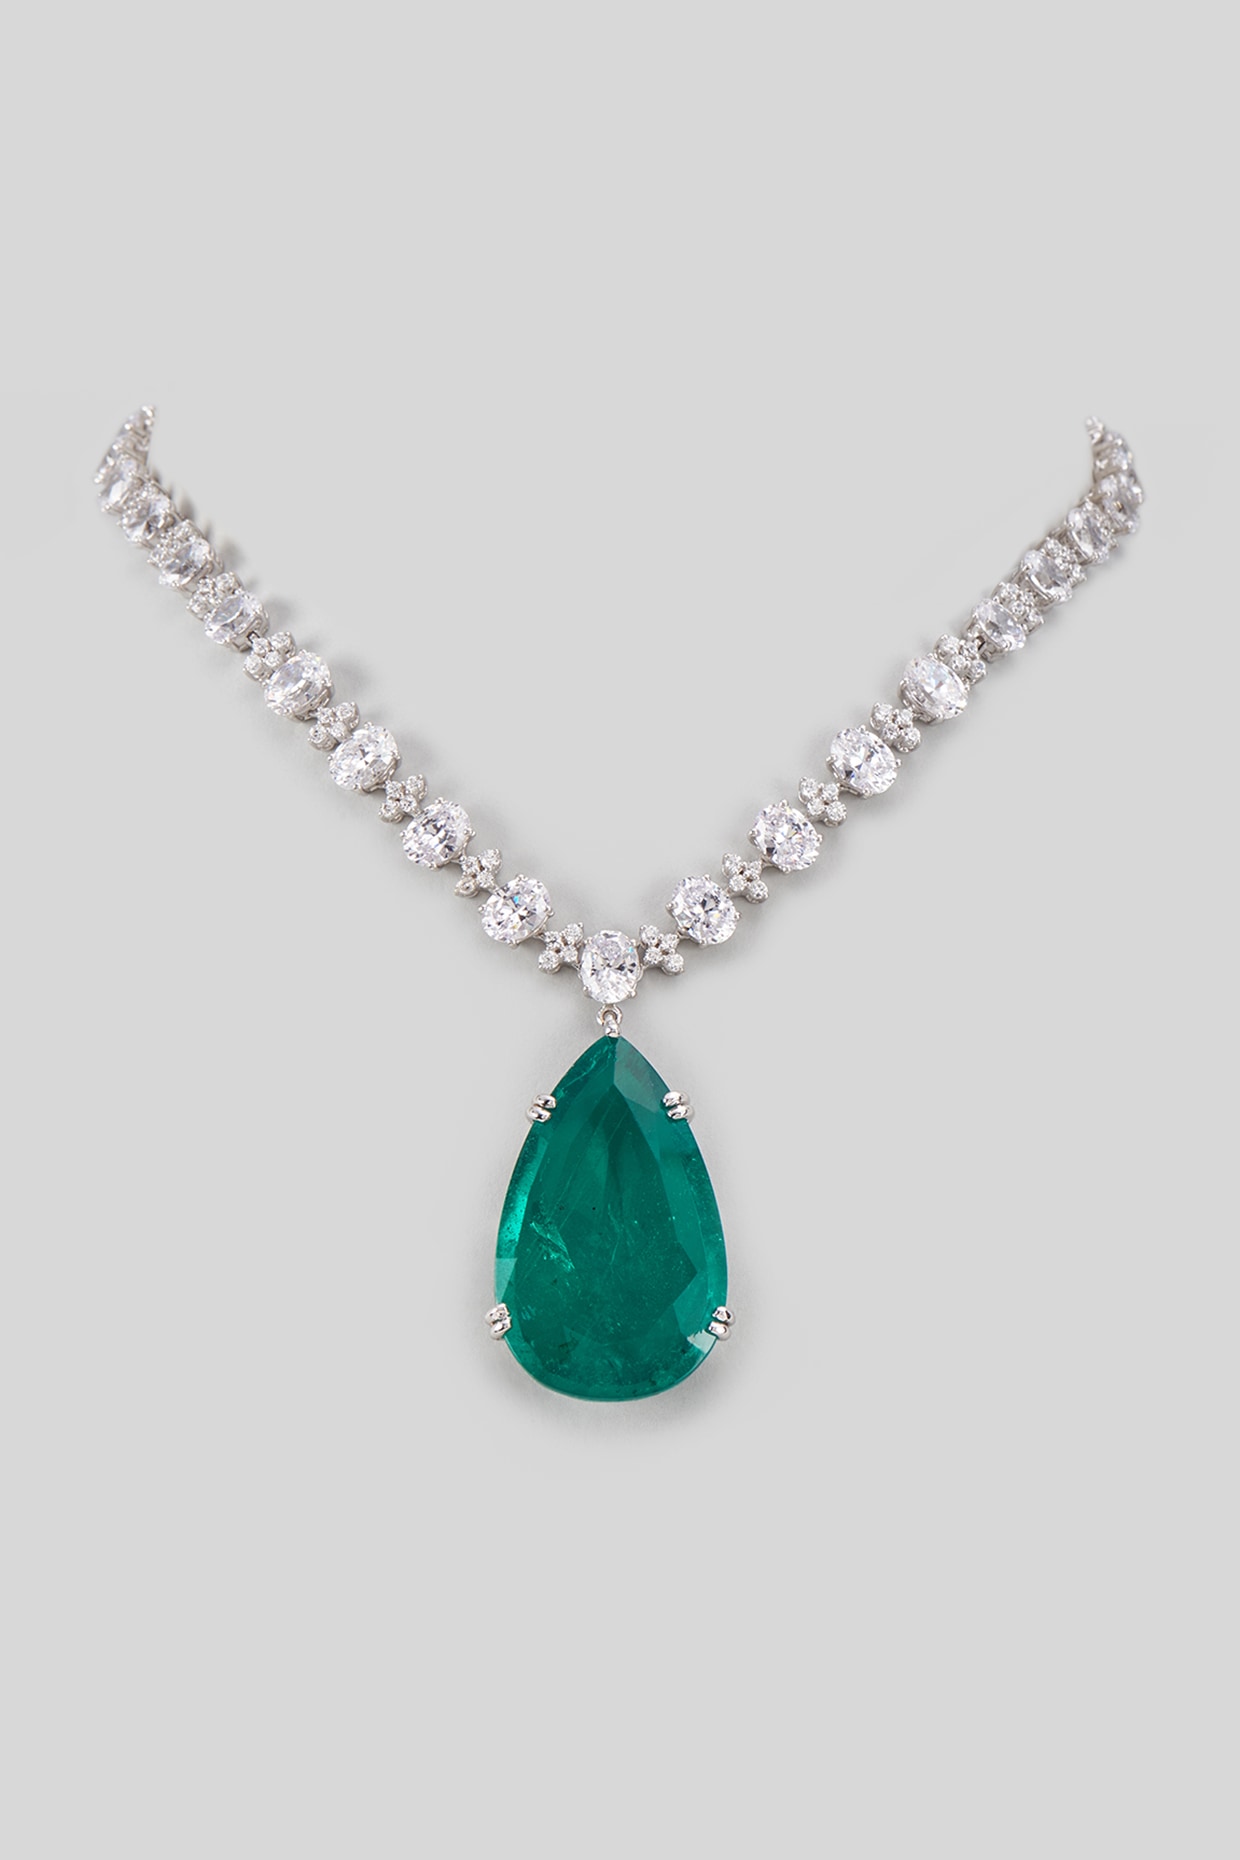 Buy Beautiful 18k Solid Gold Necklace With Natural Emerald Stone - 4mm  Size, for Women | Sargems